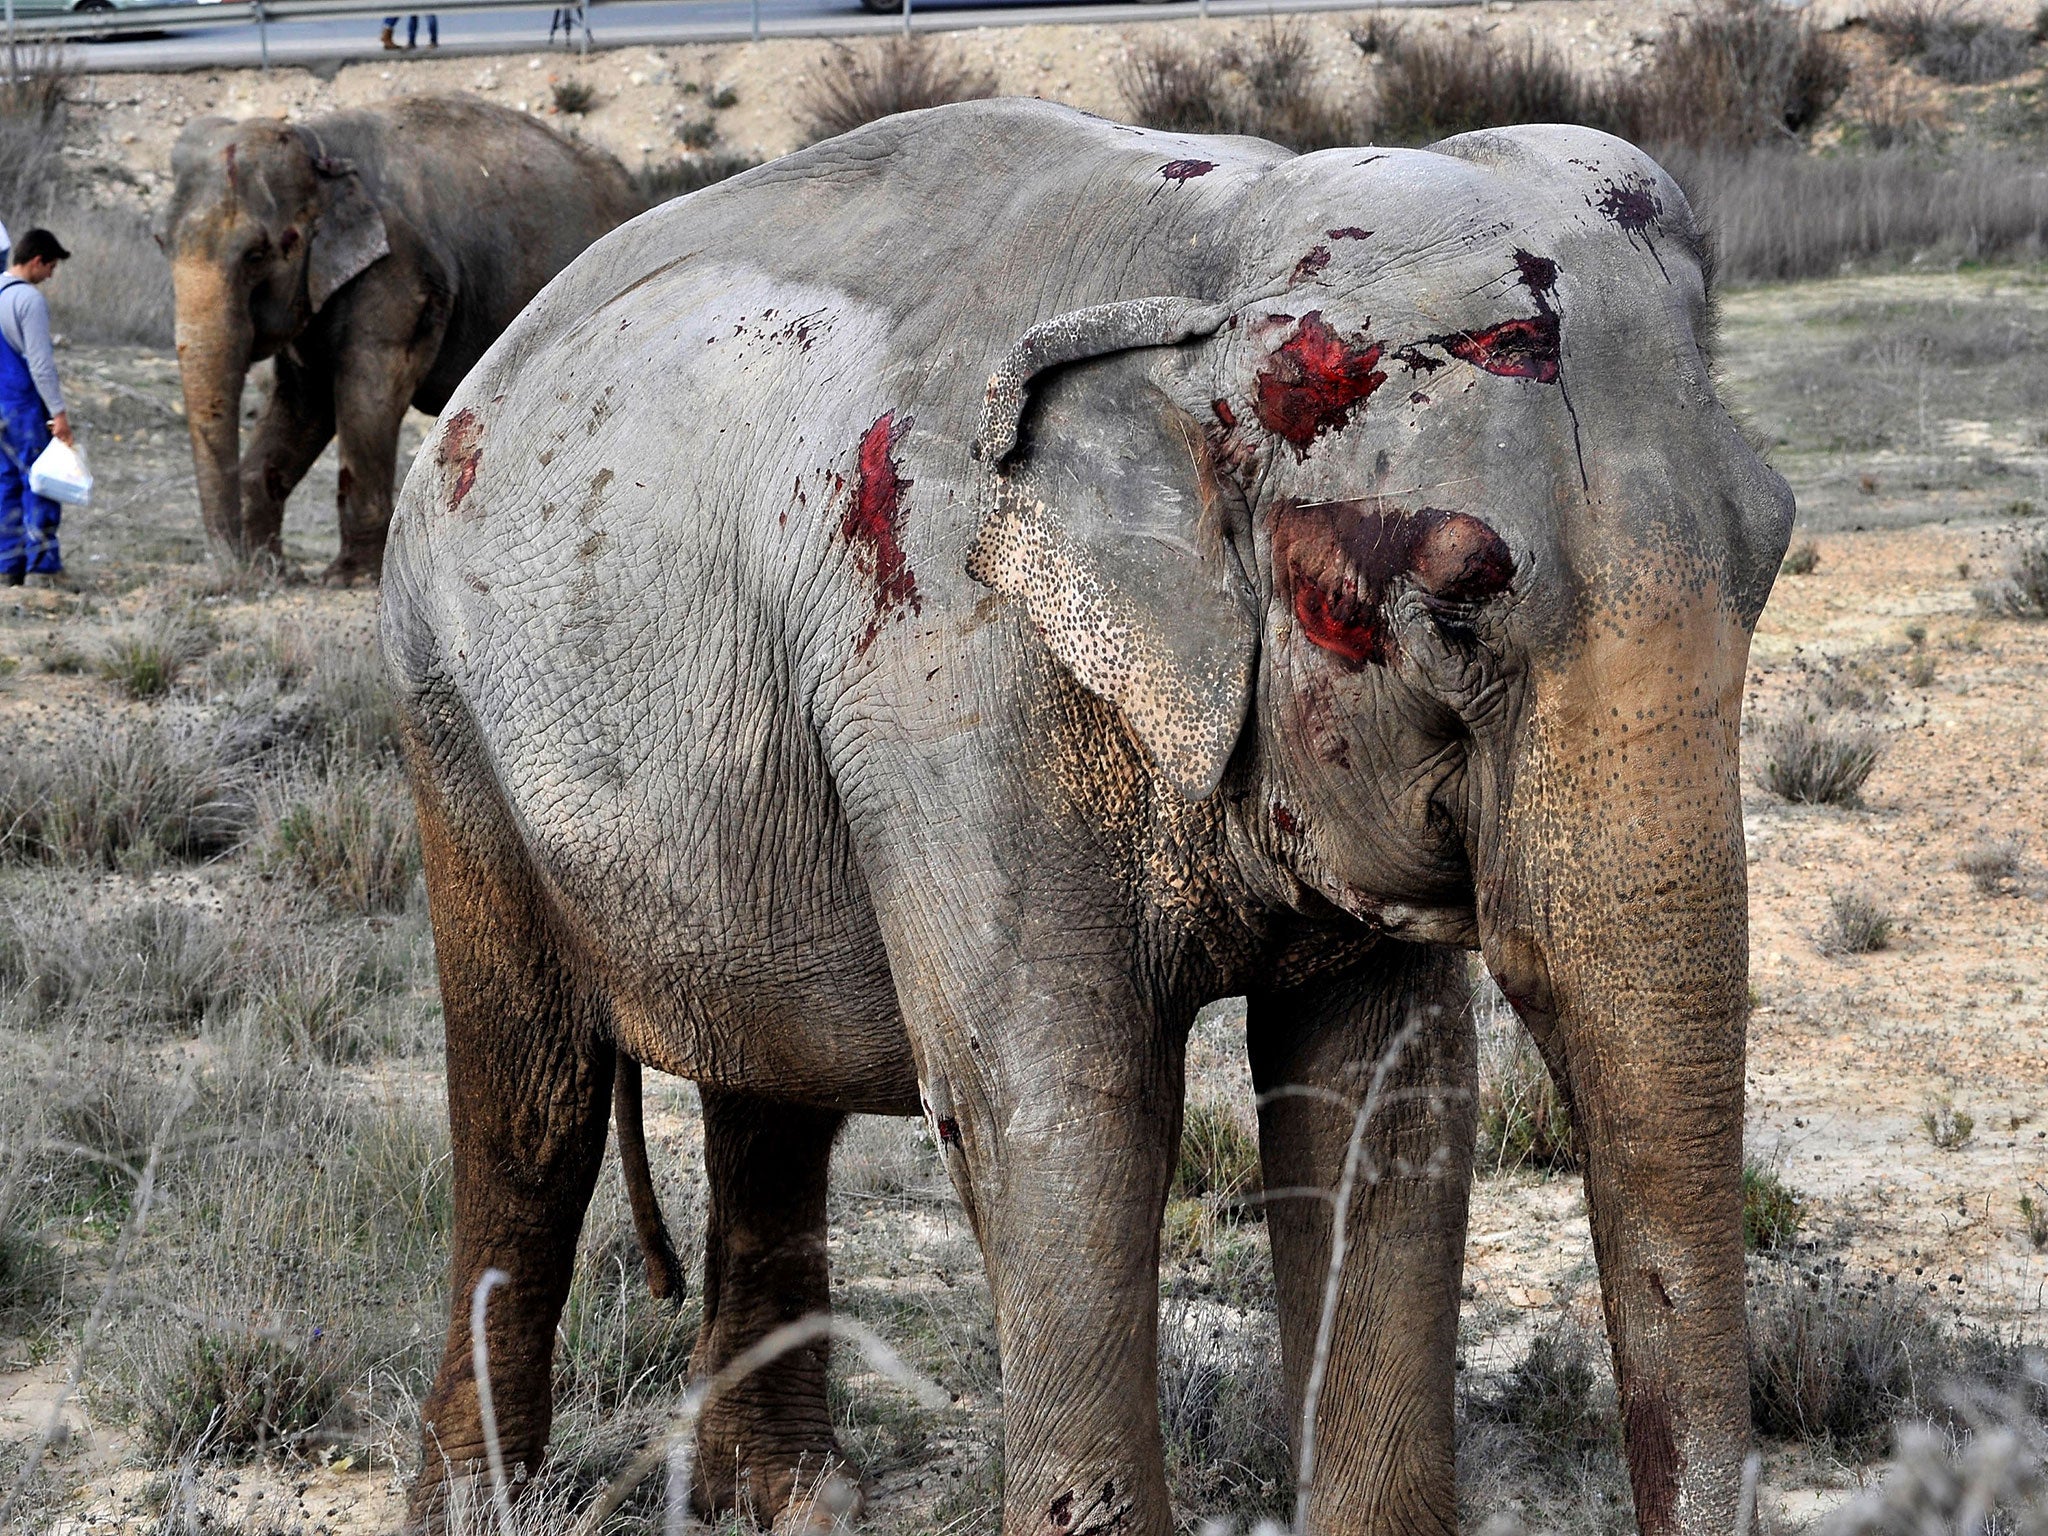 Two of the elephants suffered injuries to their faces, trunks and legs